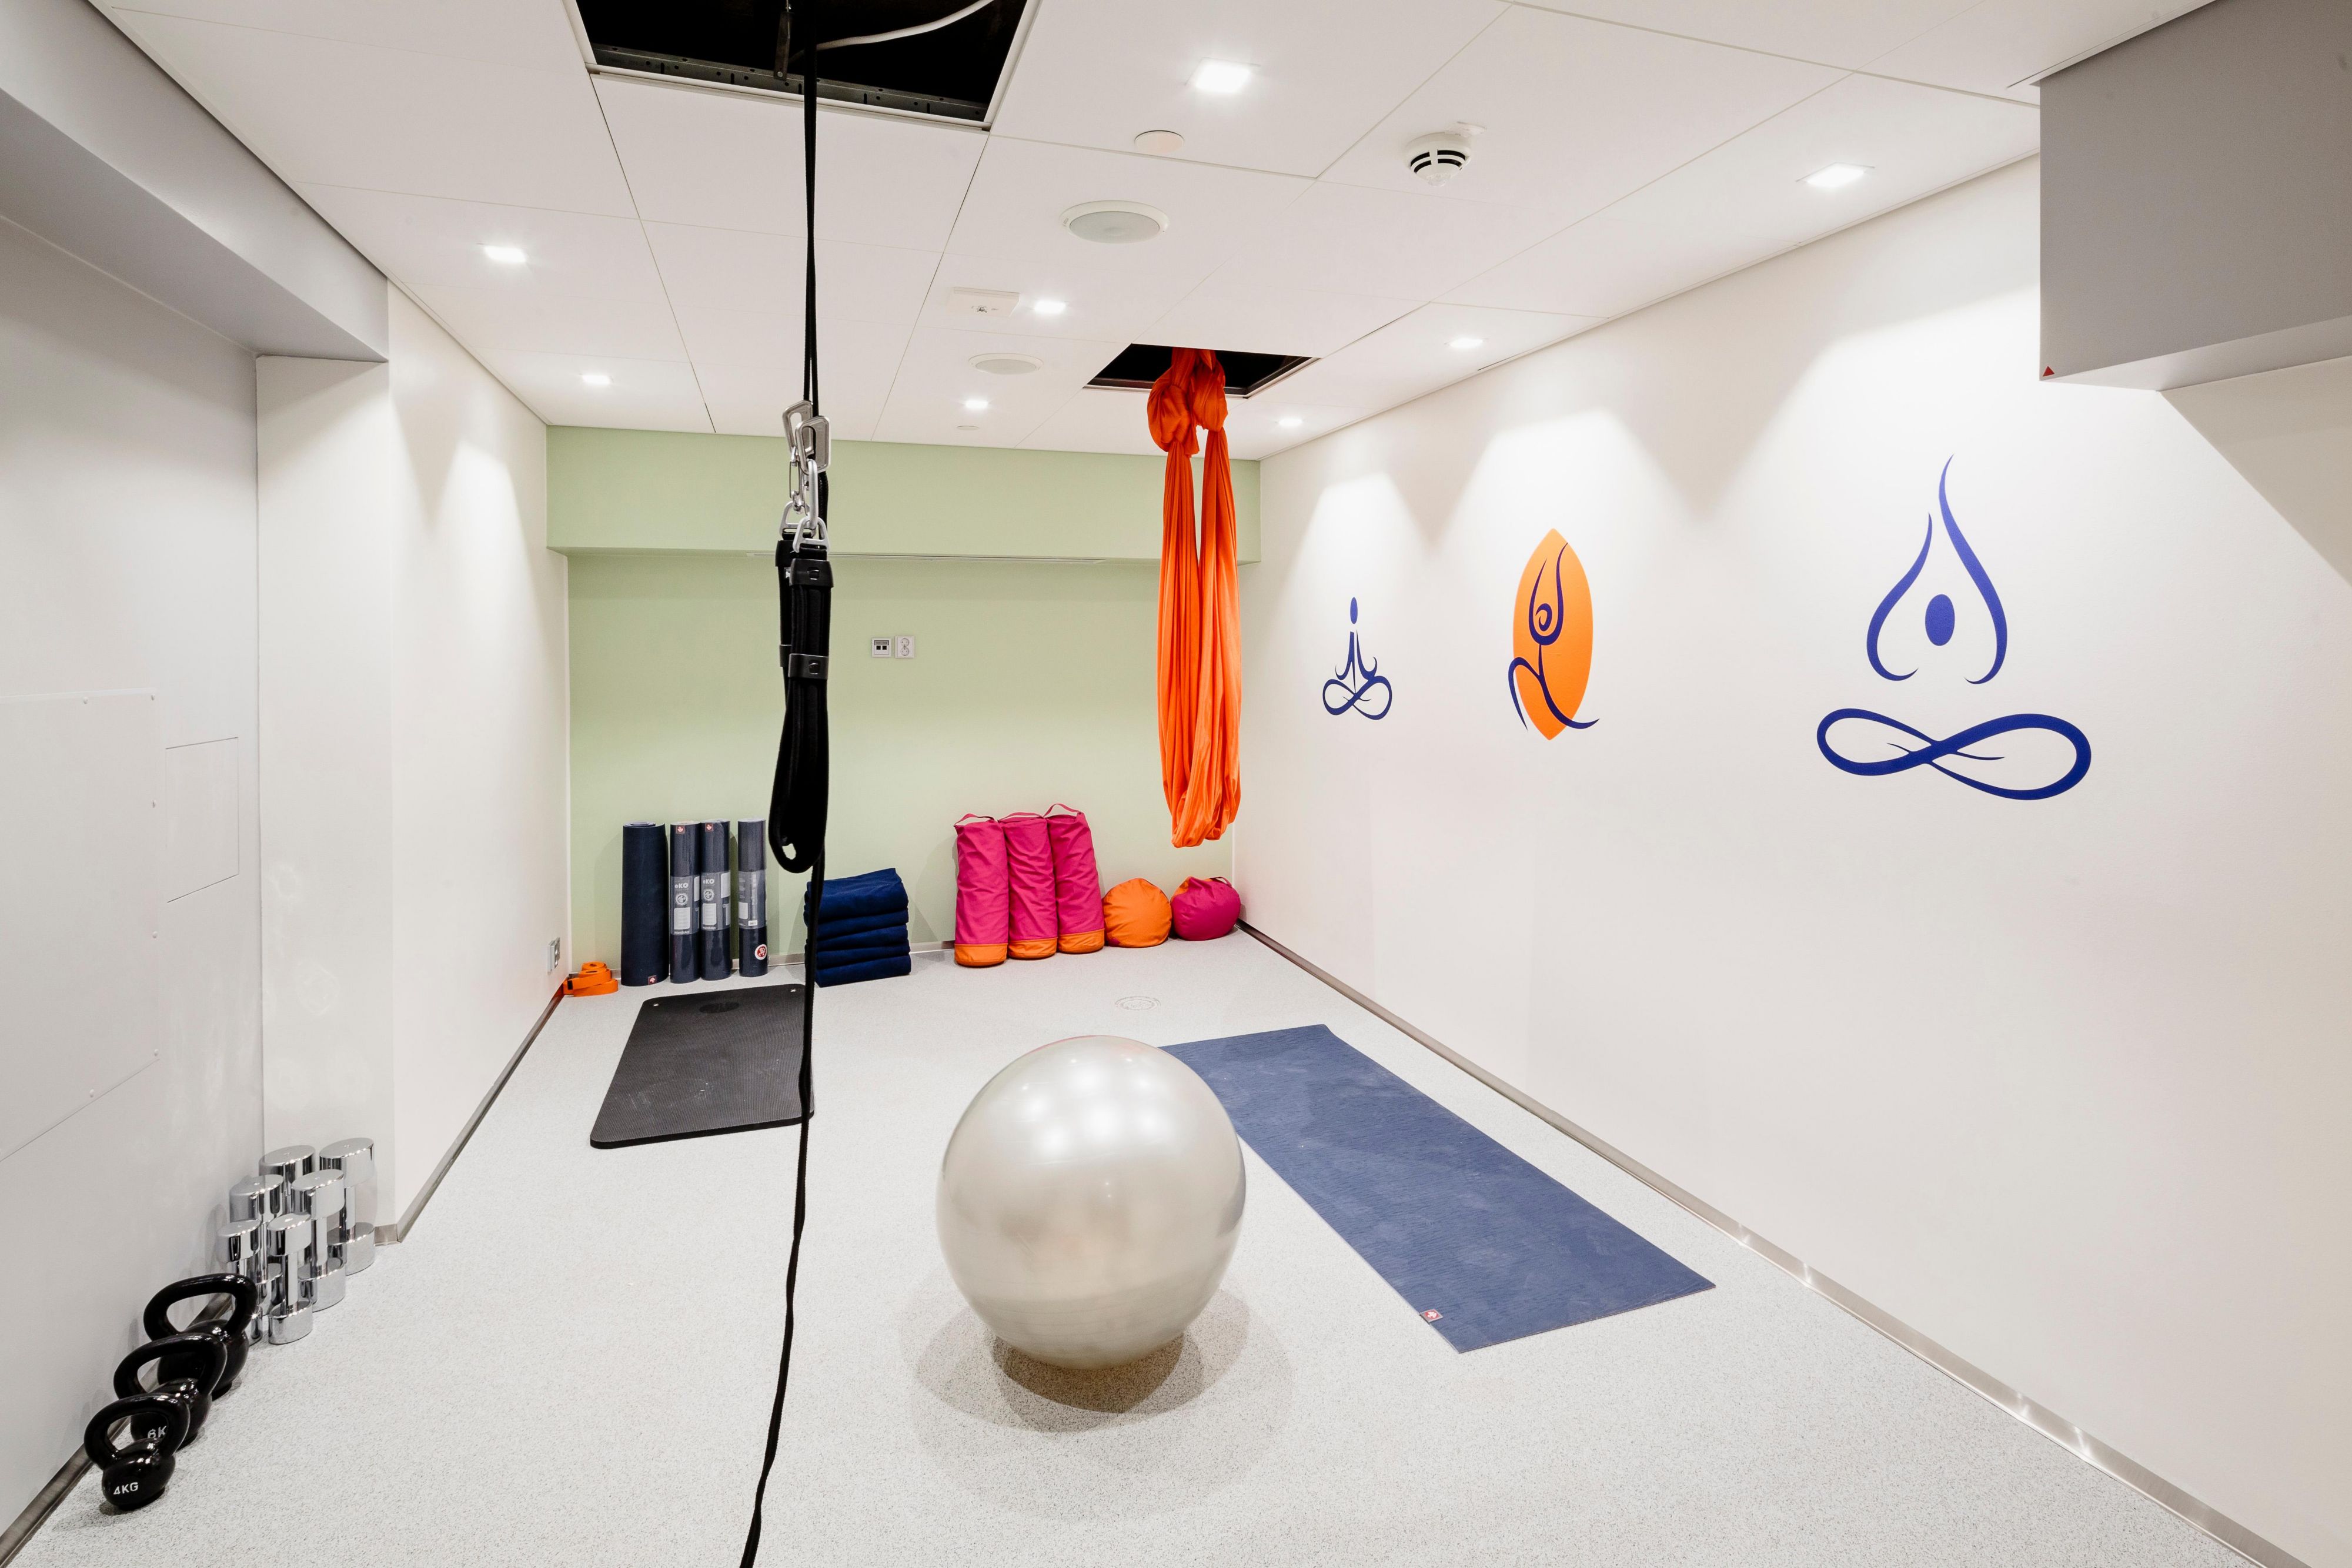 Don't forget to take your yoga pants with you. Our Body, Mind & Soul Studio comes with a yoga room, fitted with a silk yoga trapeze hammock and a functional workout system from Jungle Sports Liana. You can also find recorded yoga lessons on our hotel television.